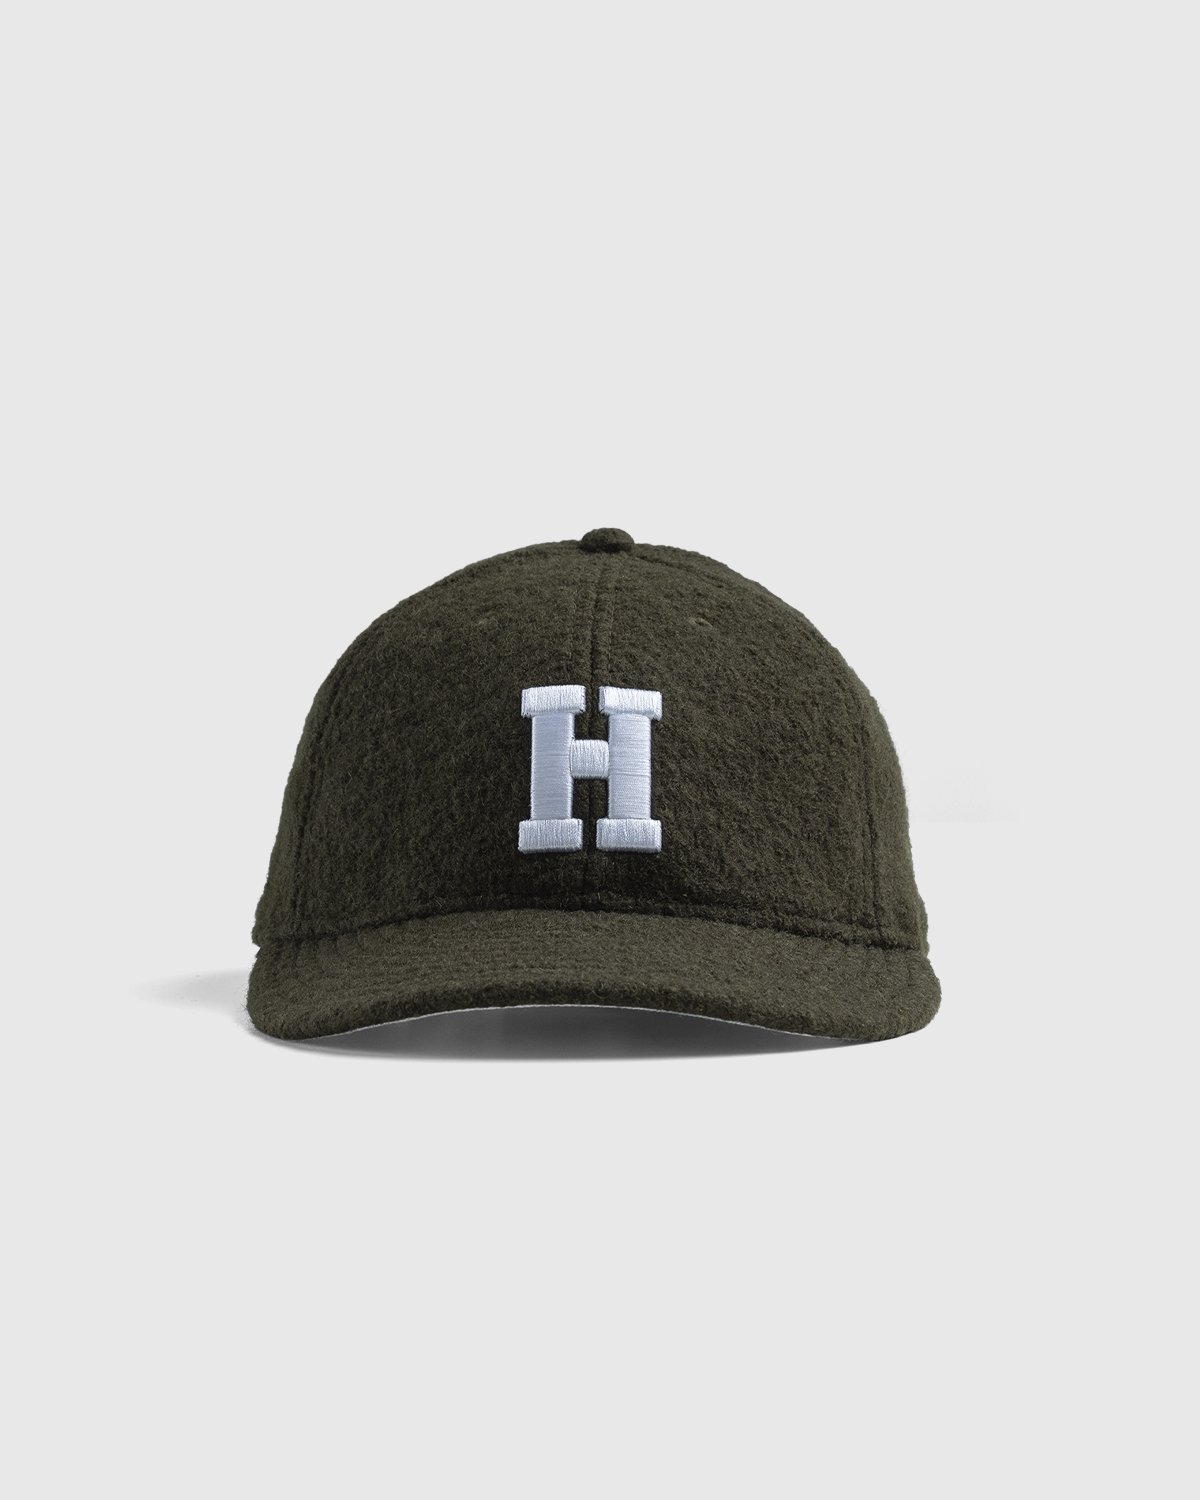 New Era x Highsnobiety - 59Fifty Forest Green - Accessories - Green - Image 2